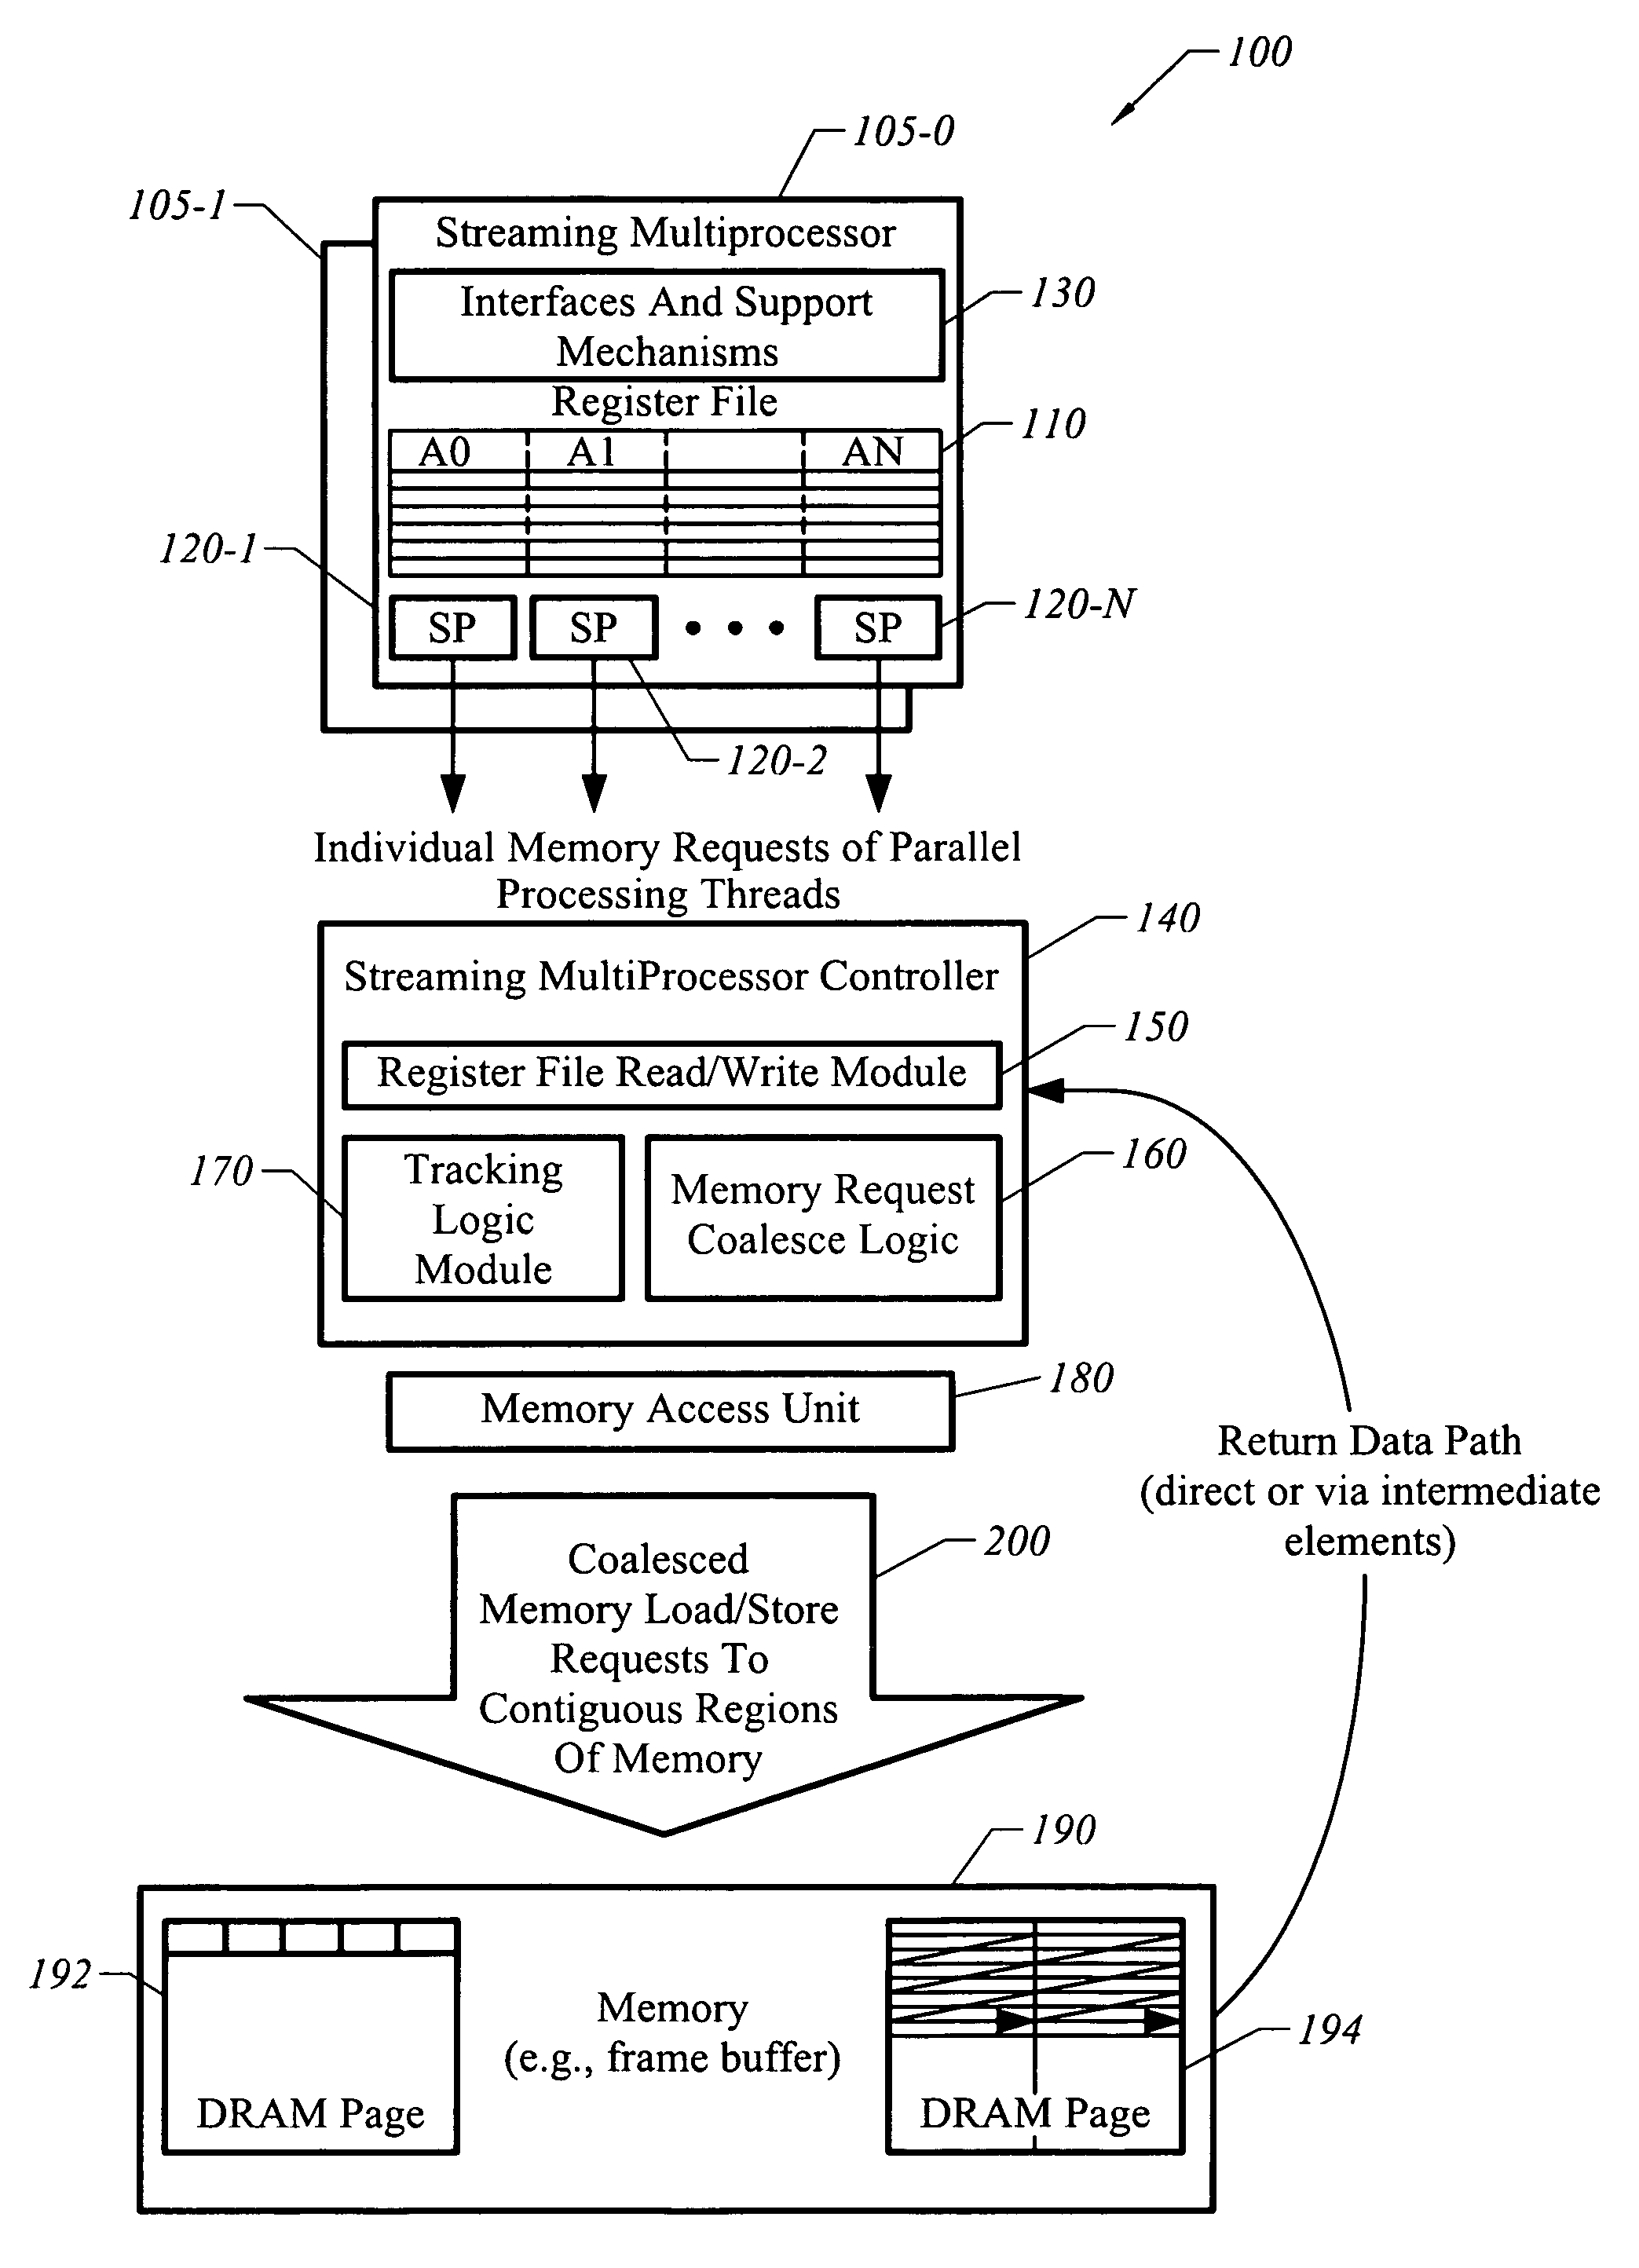 Apparatus, system, and method for coalescing parallel memory requests